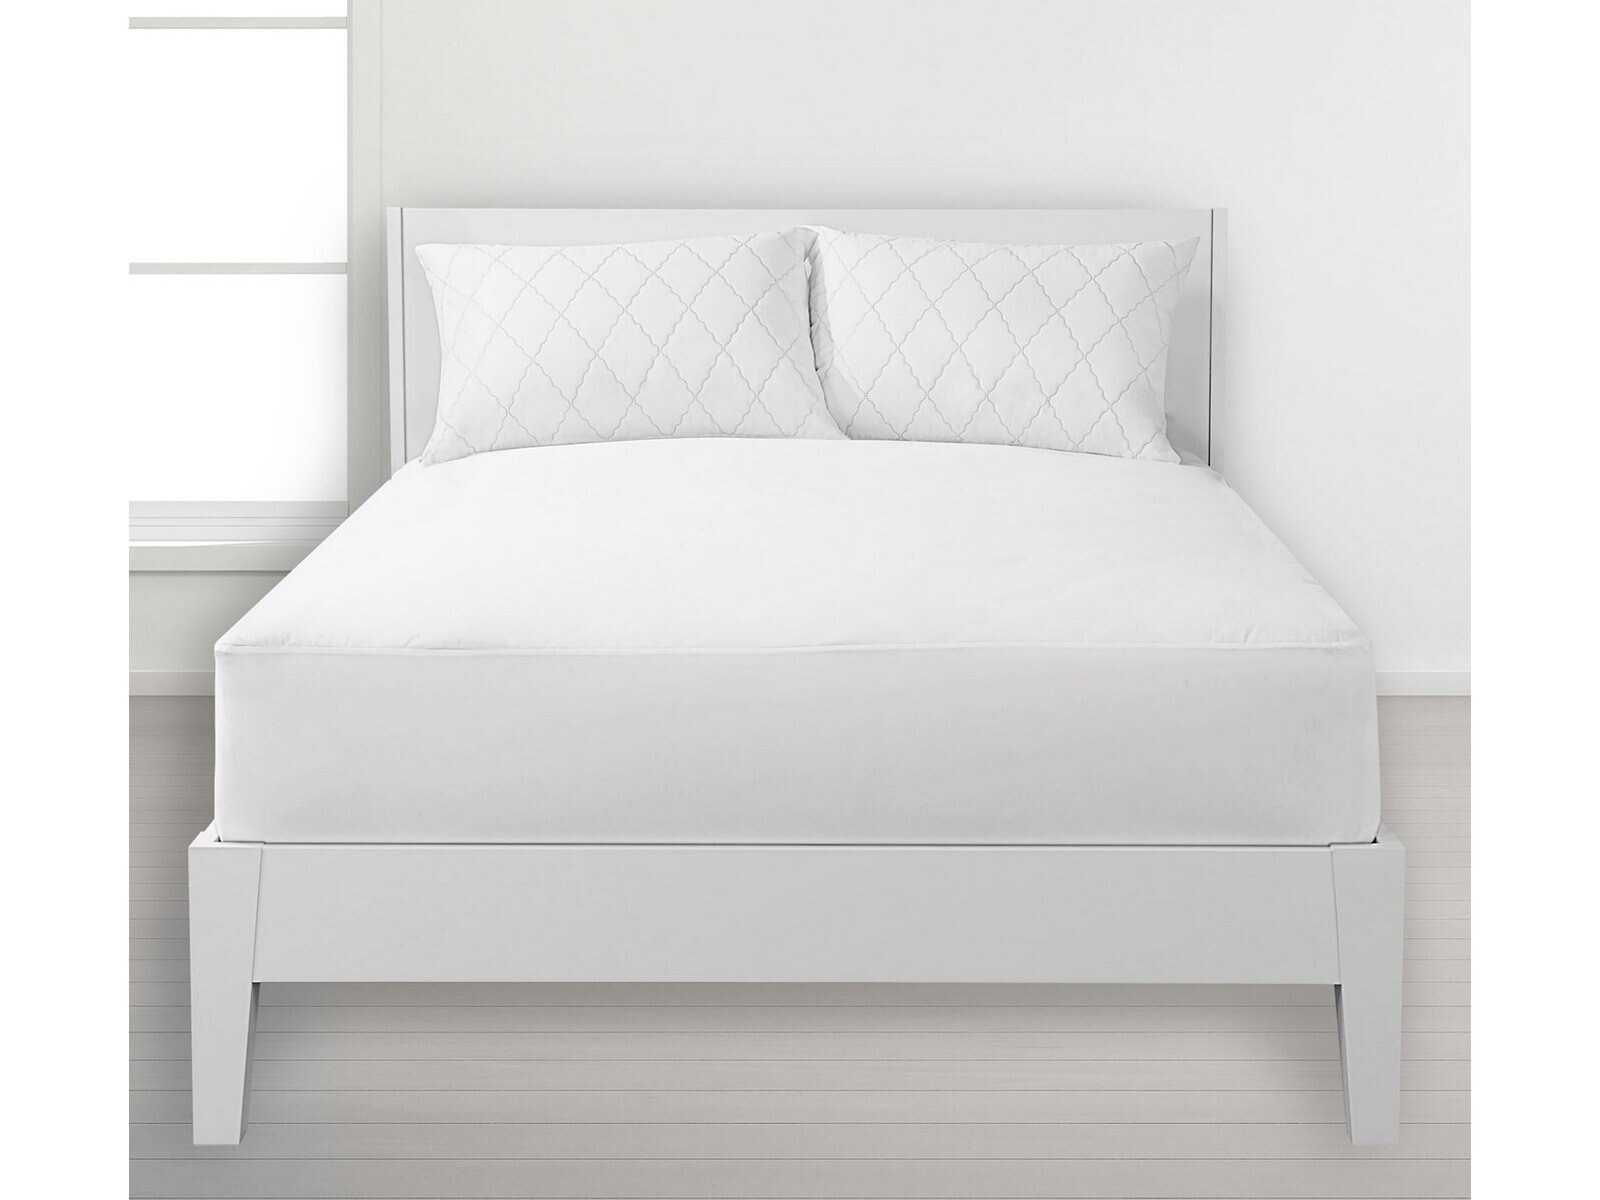 allerease ultimate comfort allergy protection mattress pad